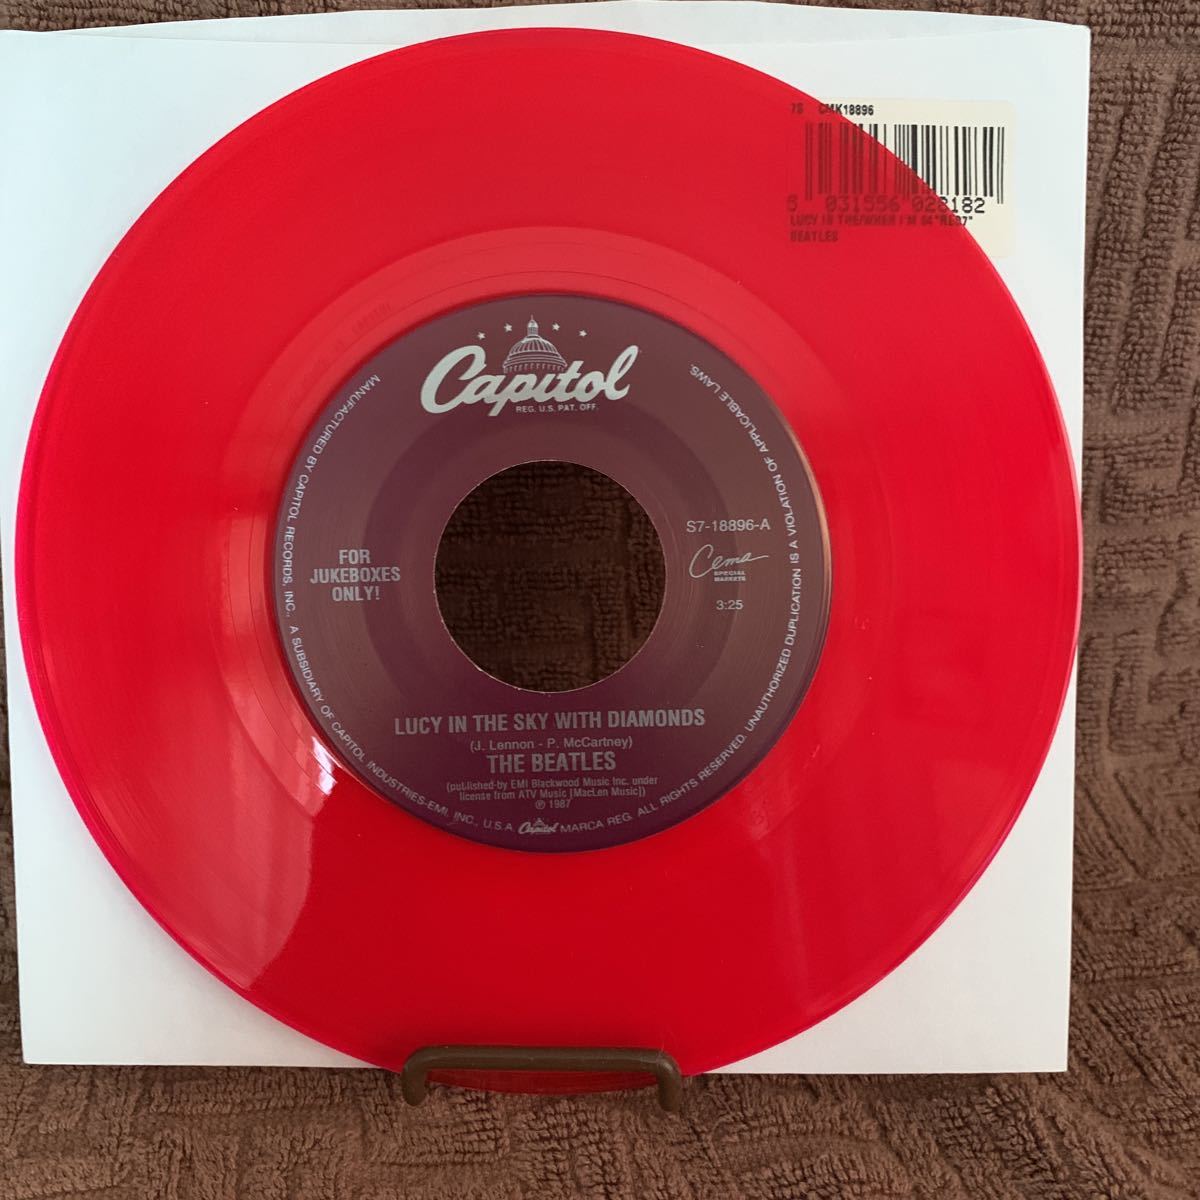 BEATLES US Capitol Jukebox Single S7-18896 LUCY IN THE SKY WITH DIAMONDS /  WHEN I'M 64 product details | Yahoo! Auctions Japan proxy bidding and  shopping service | FROM JAPAN